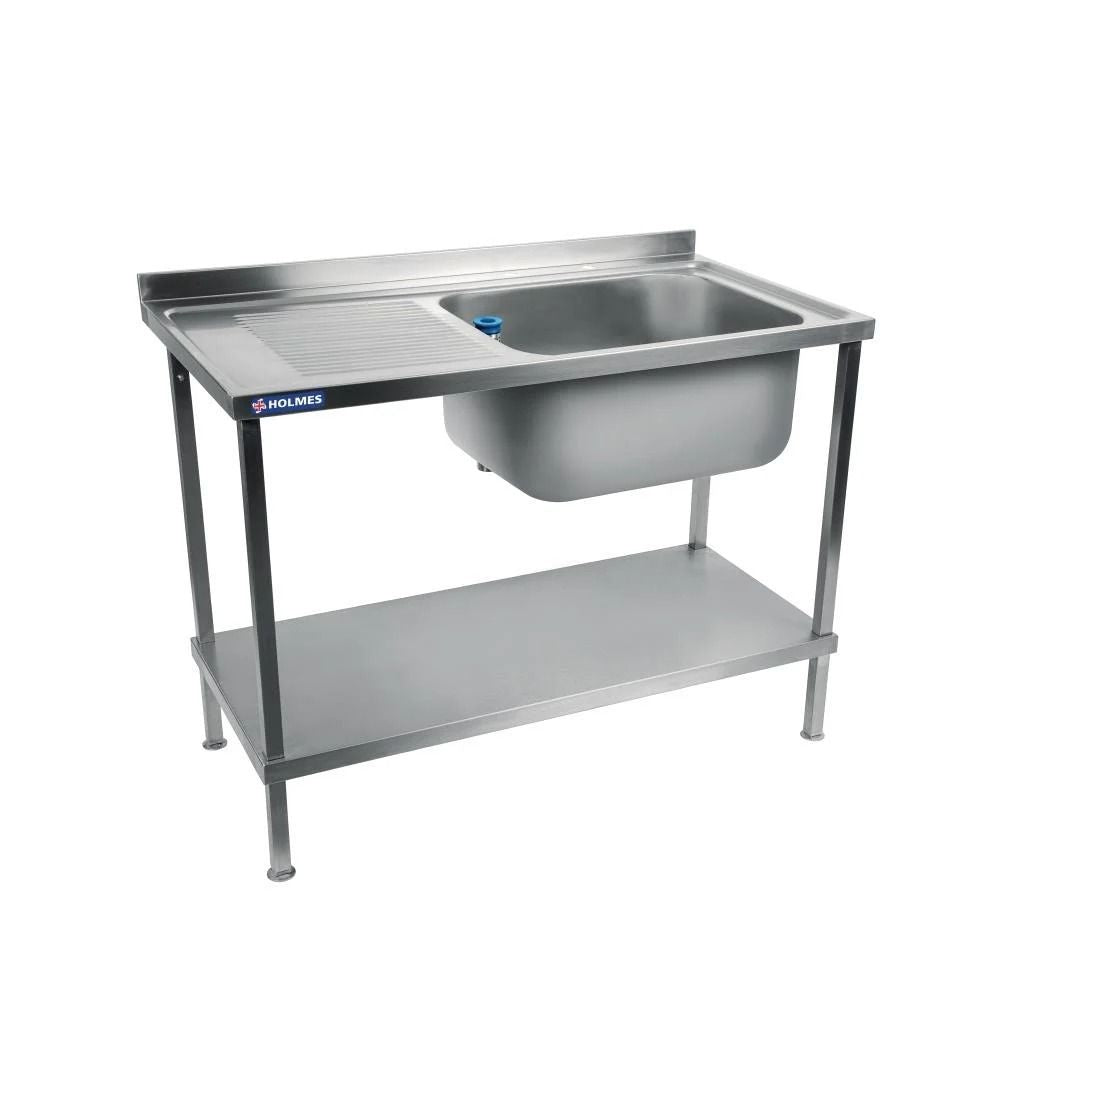 Holmes Self Assembly Stainless Steel Sink Single Left Hand Drainer 1500mm - DR365